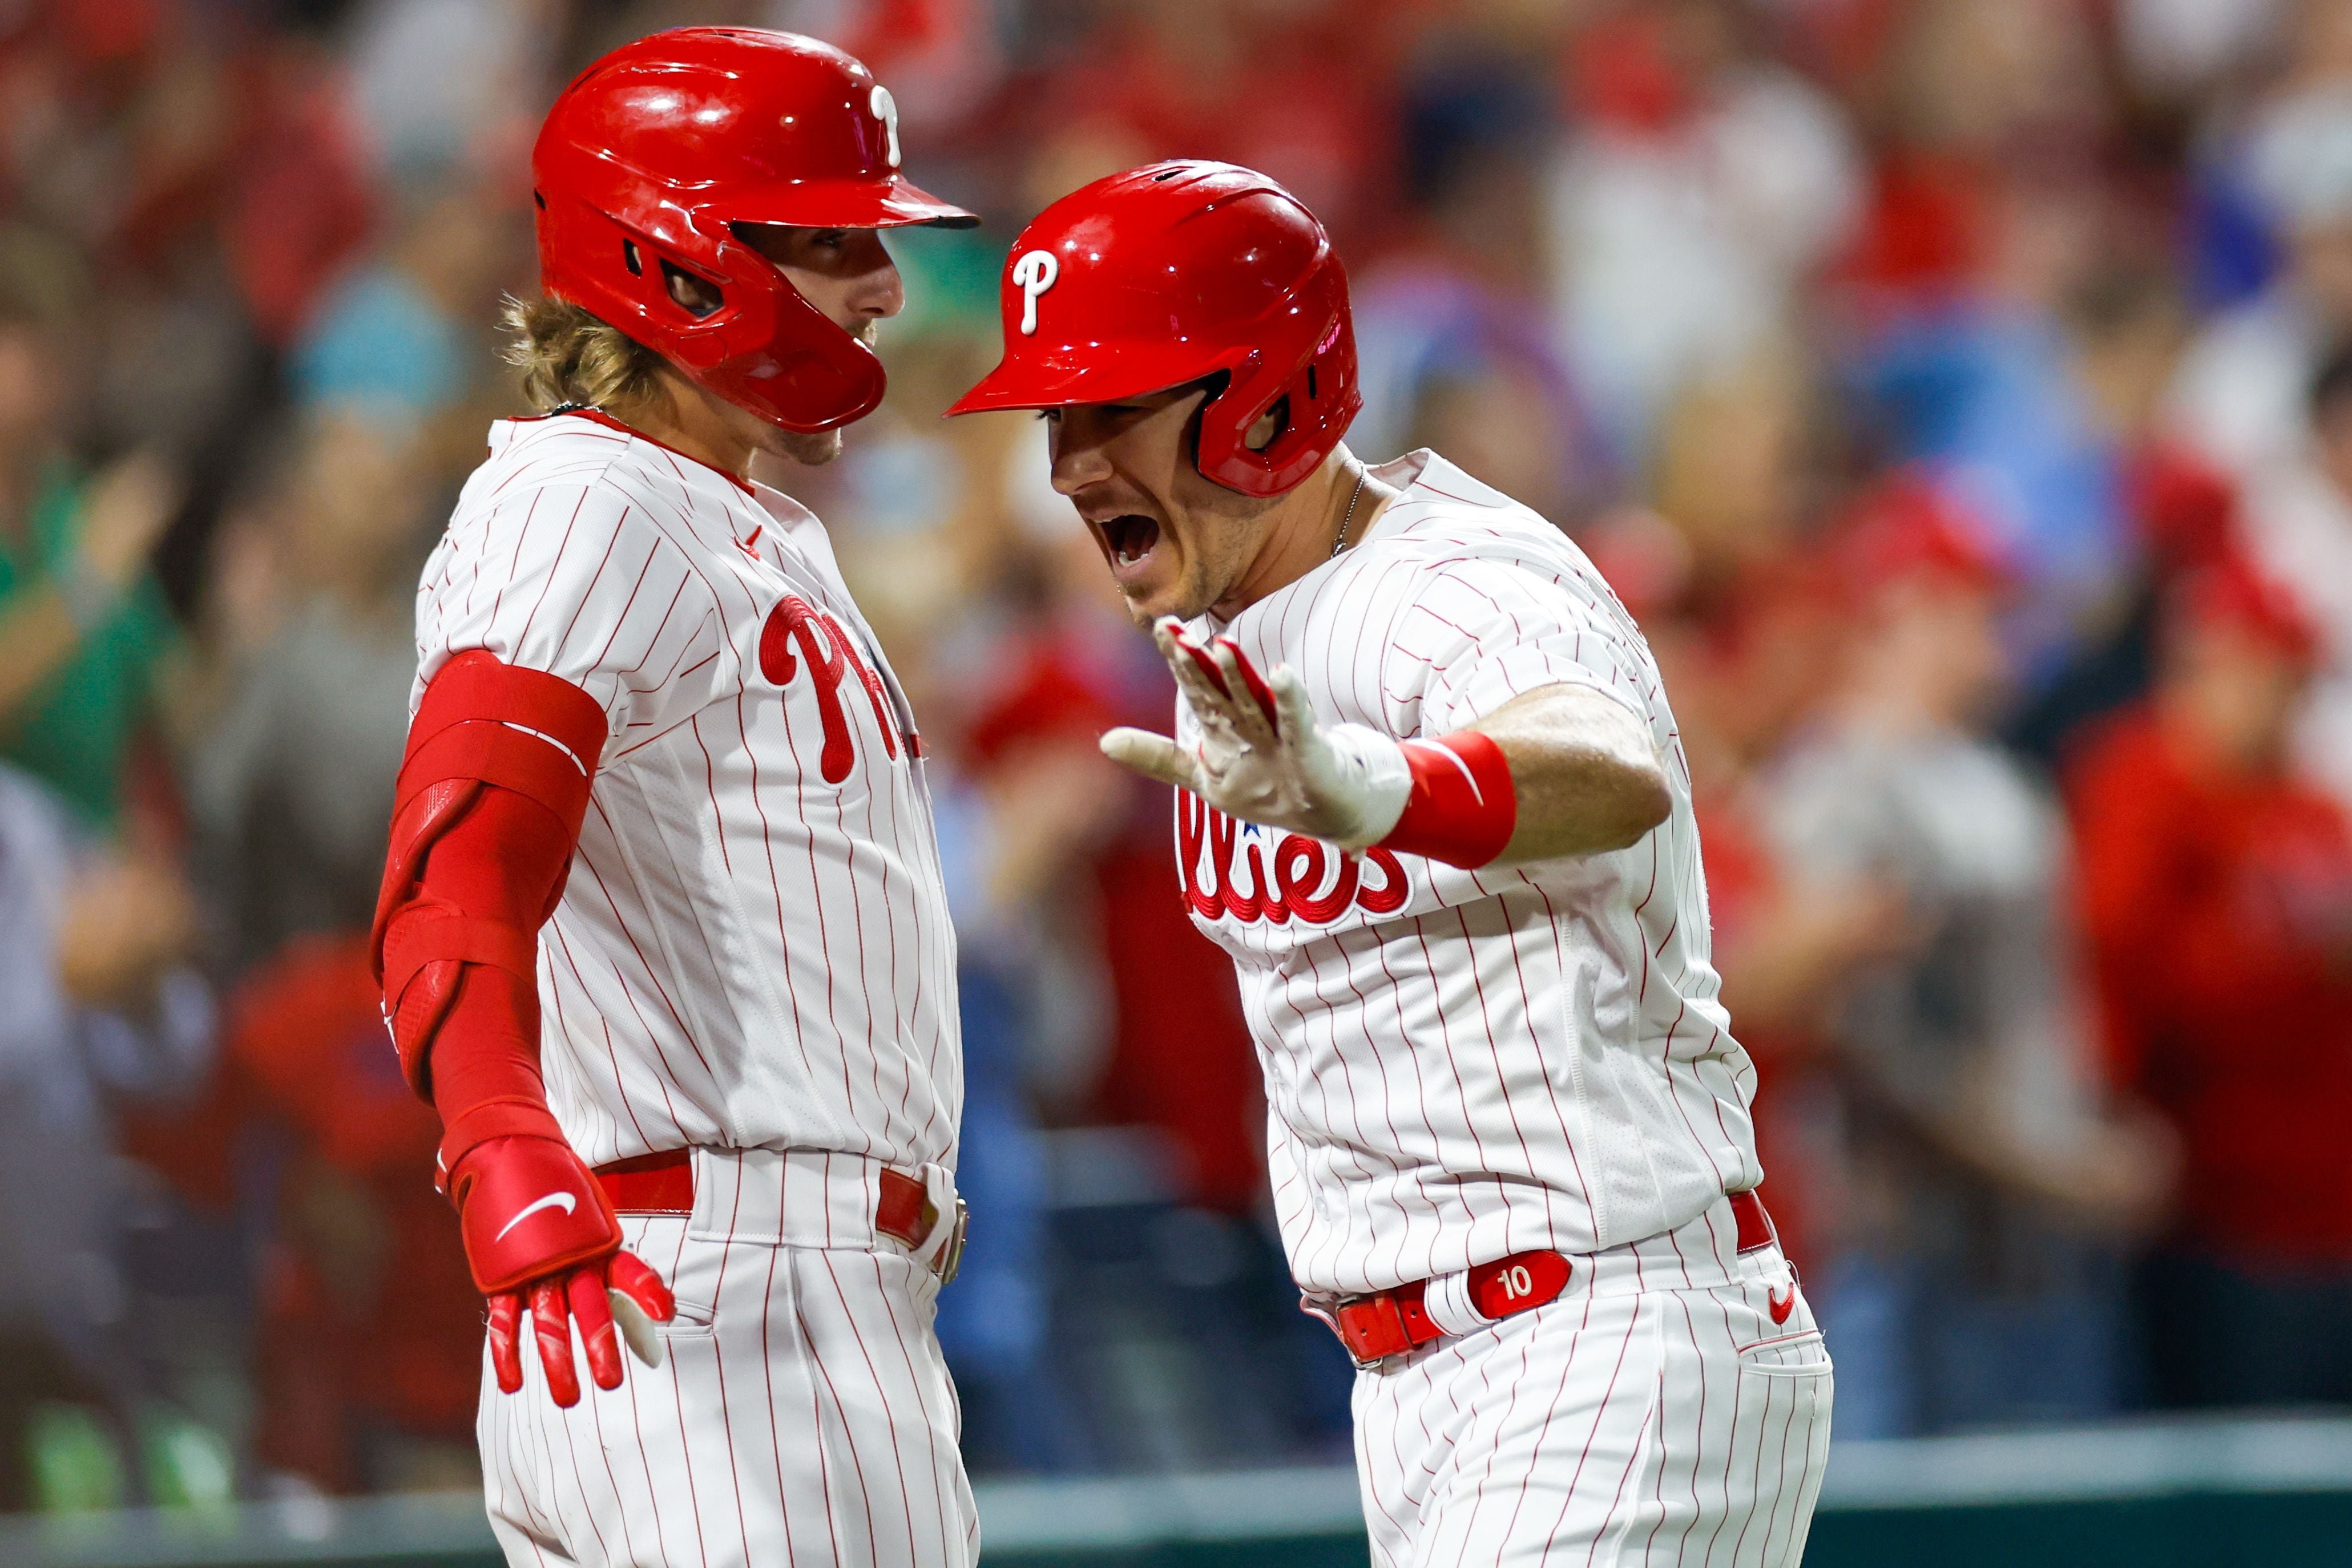 VIDEO: Spanish Call of Bryce Harper Walk-Off Grand Slam is Electric